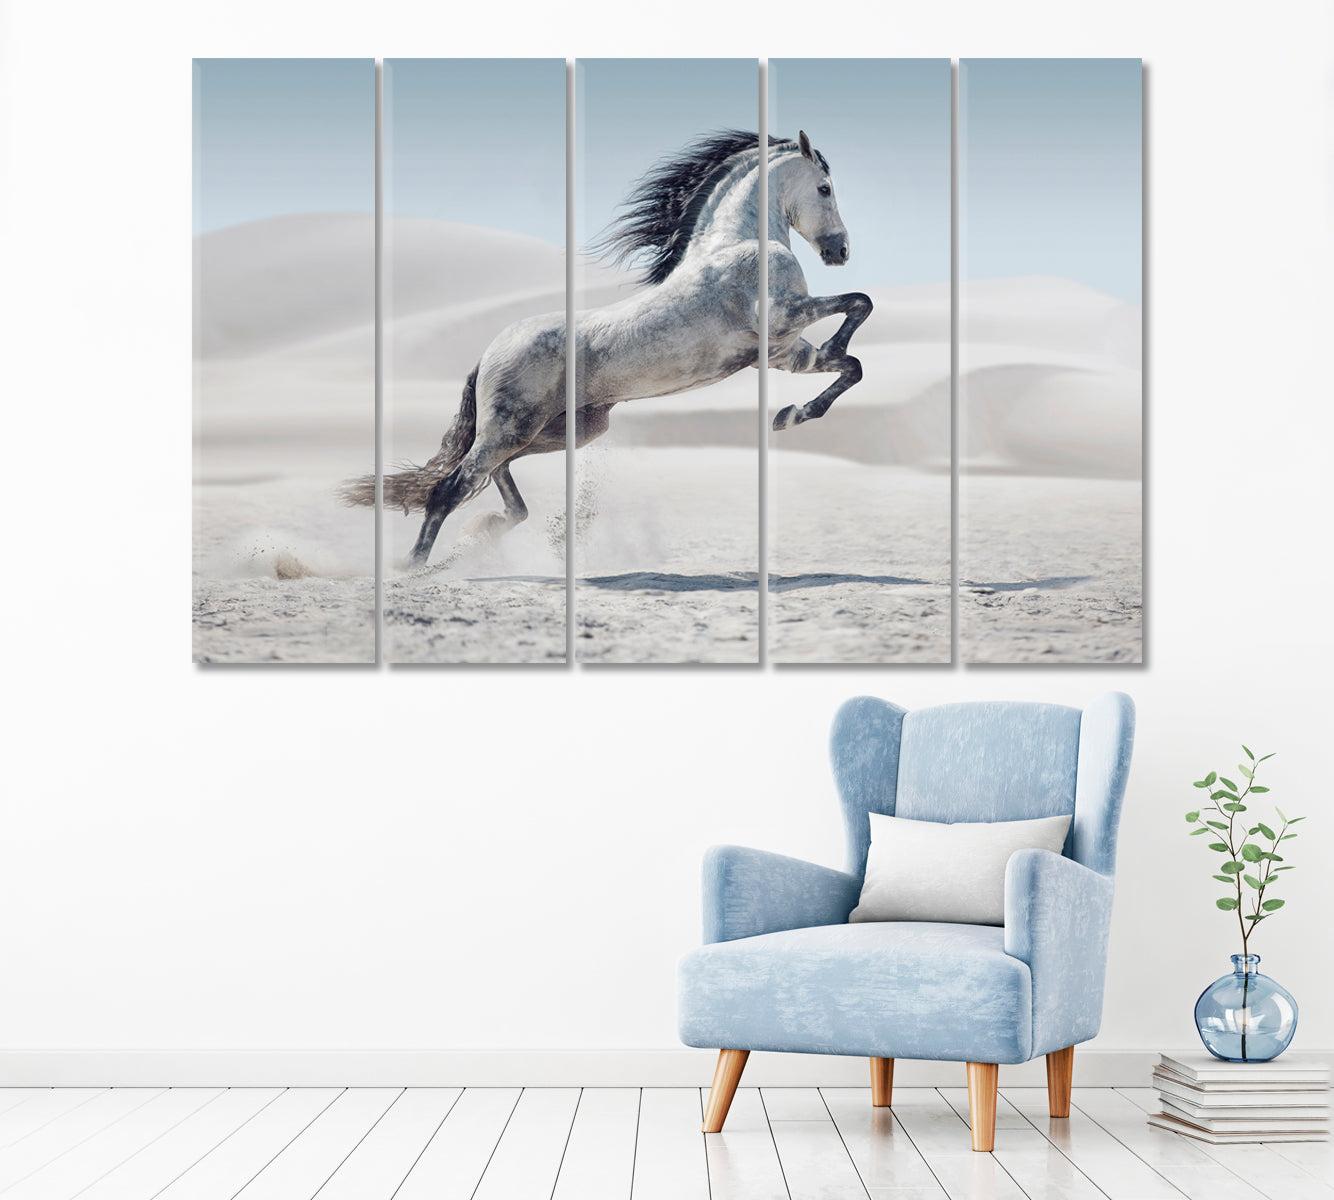 Horse in Desert Canvas Print ArtLexy 5 Panels 36"x24" inches 